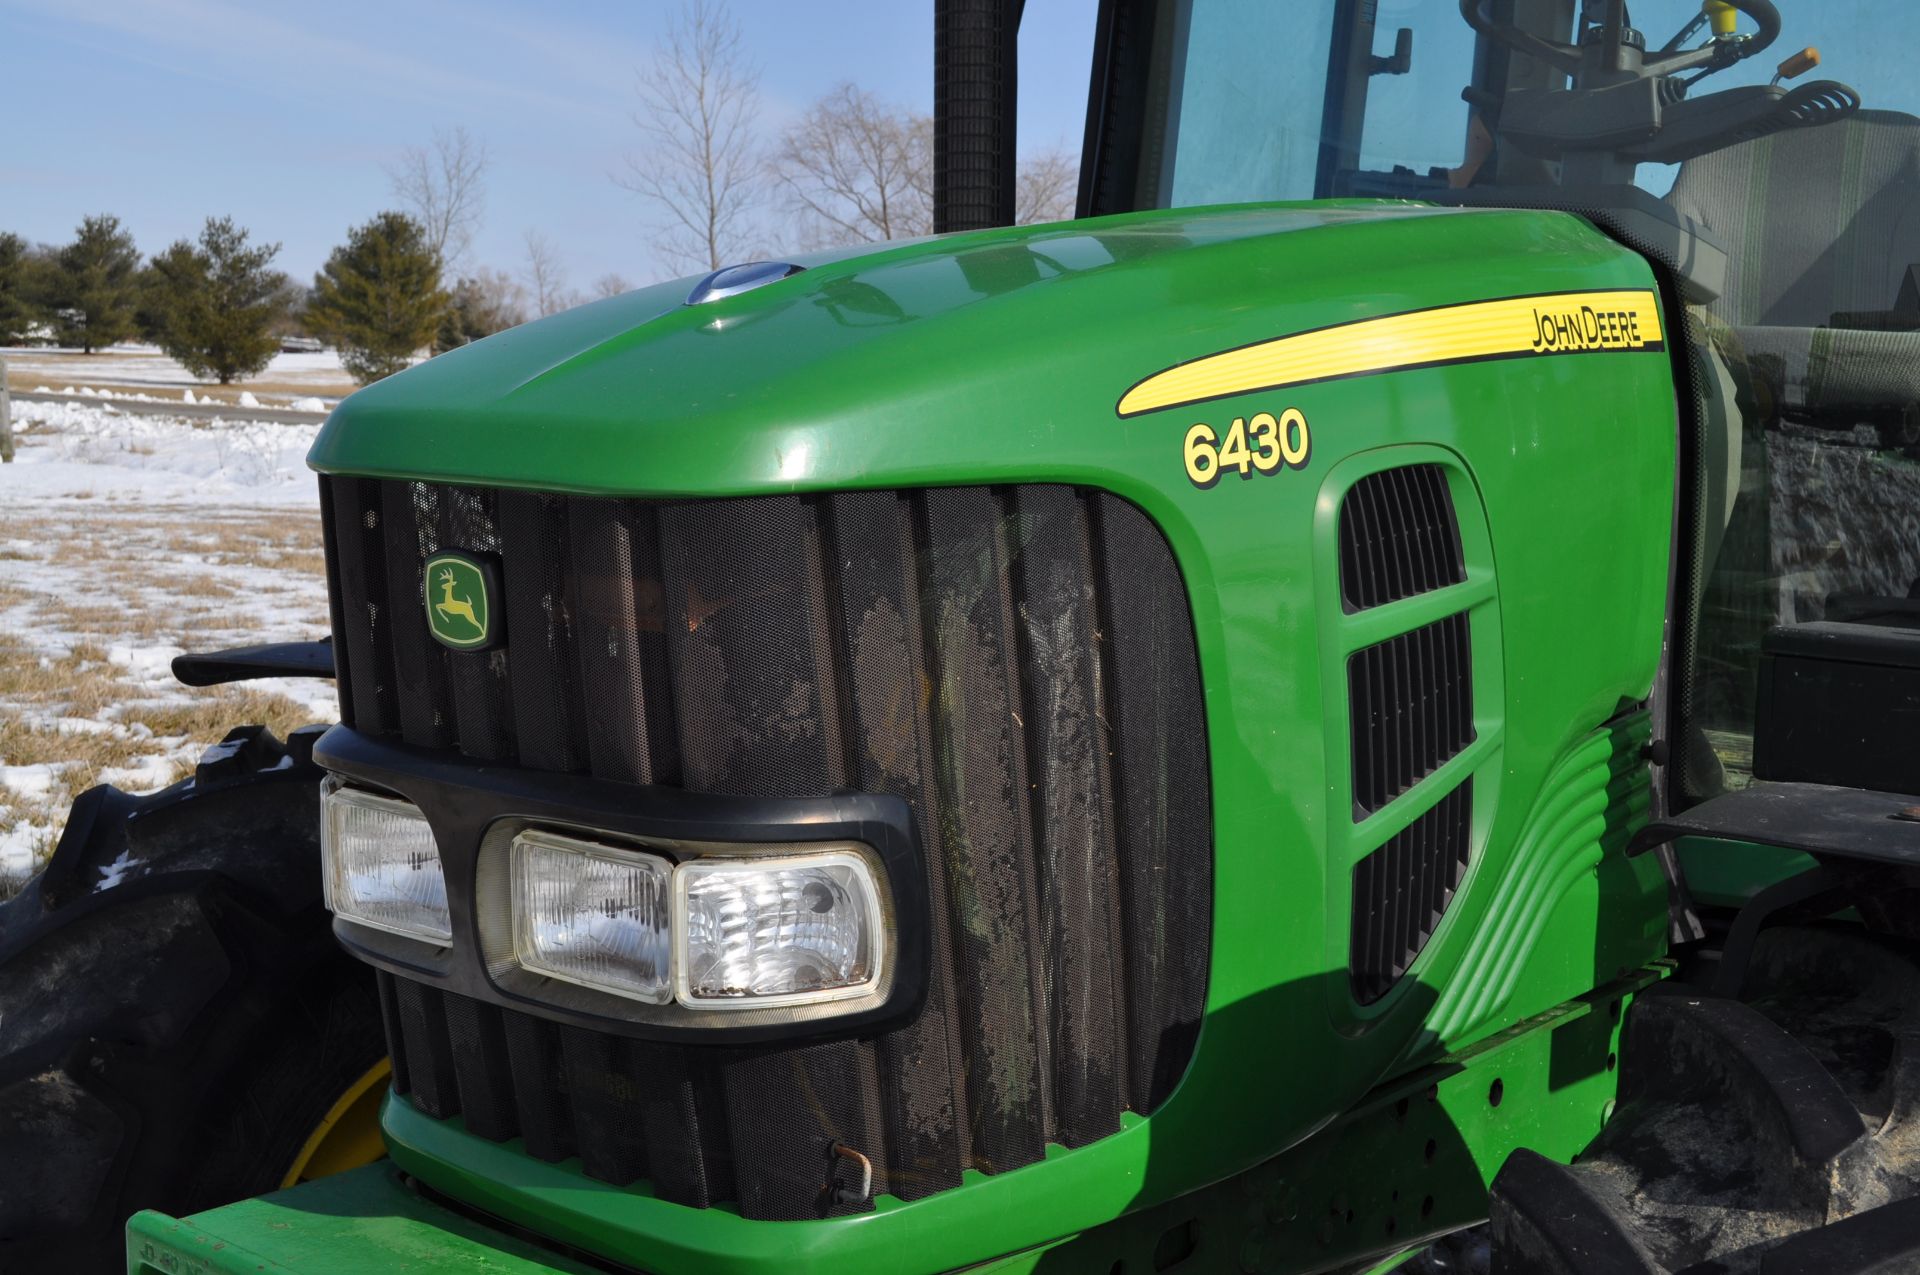 John Deere 6430 tractor, MFWD, C/H/A, 6x4 trans, 460/85R38 rear, 420/85R24 front, front fenders, - Image 23 of 36